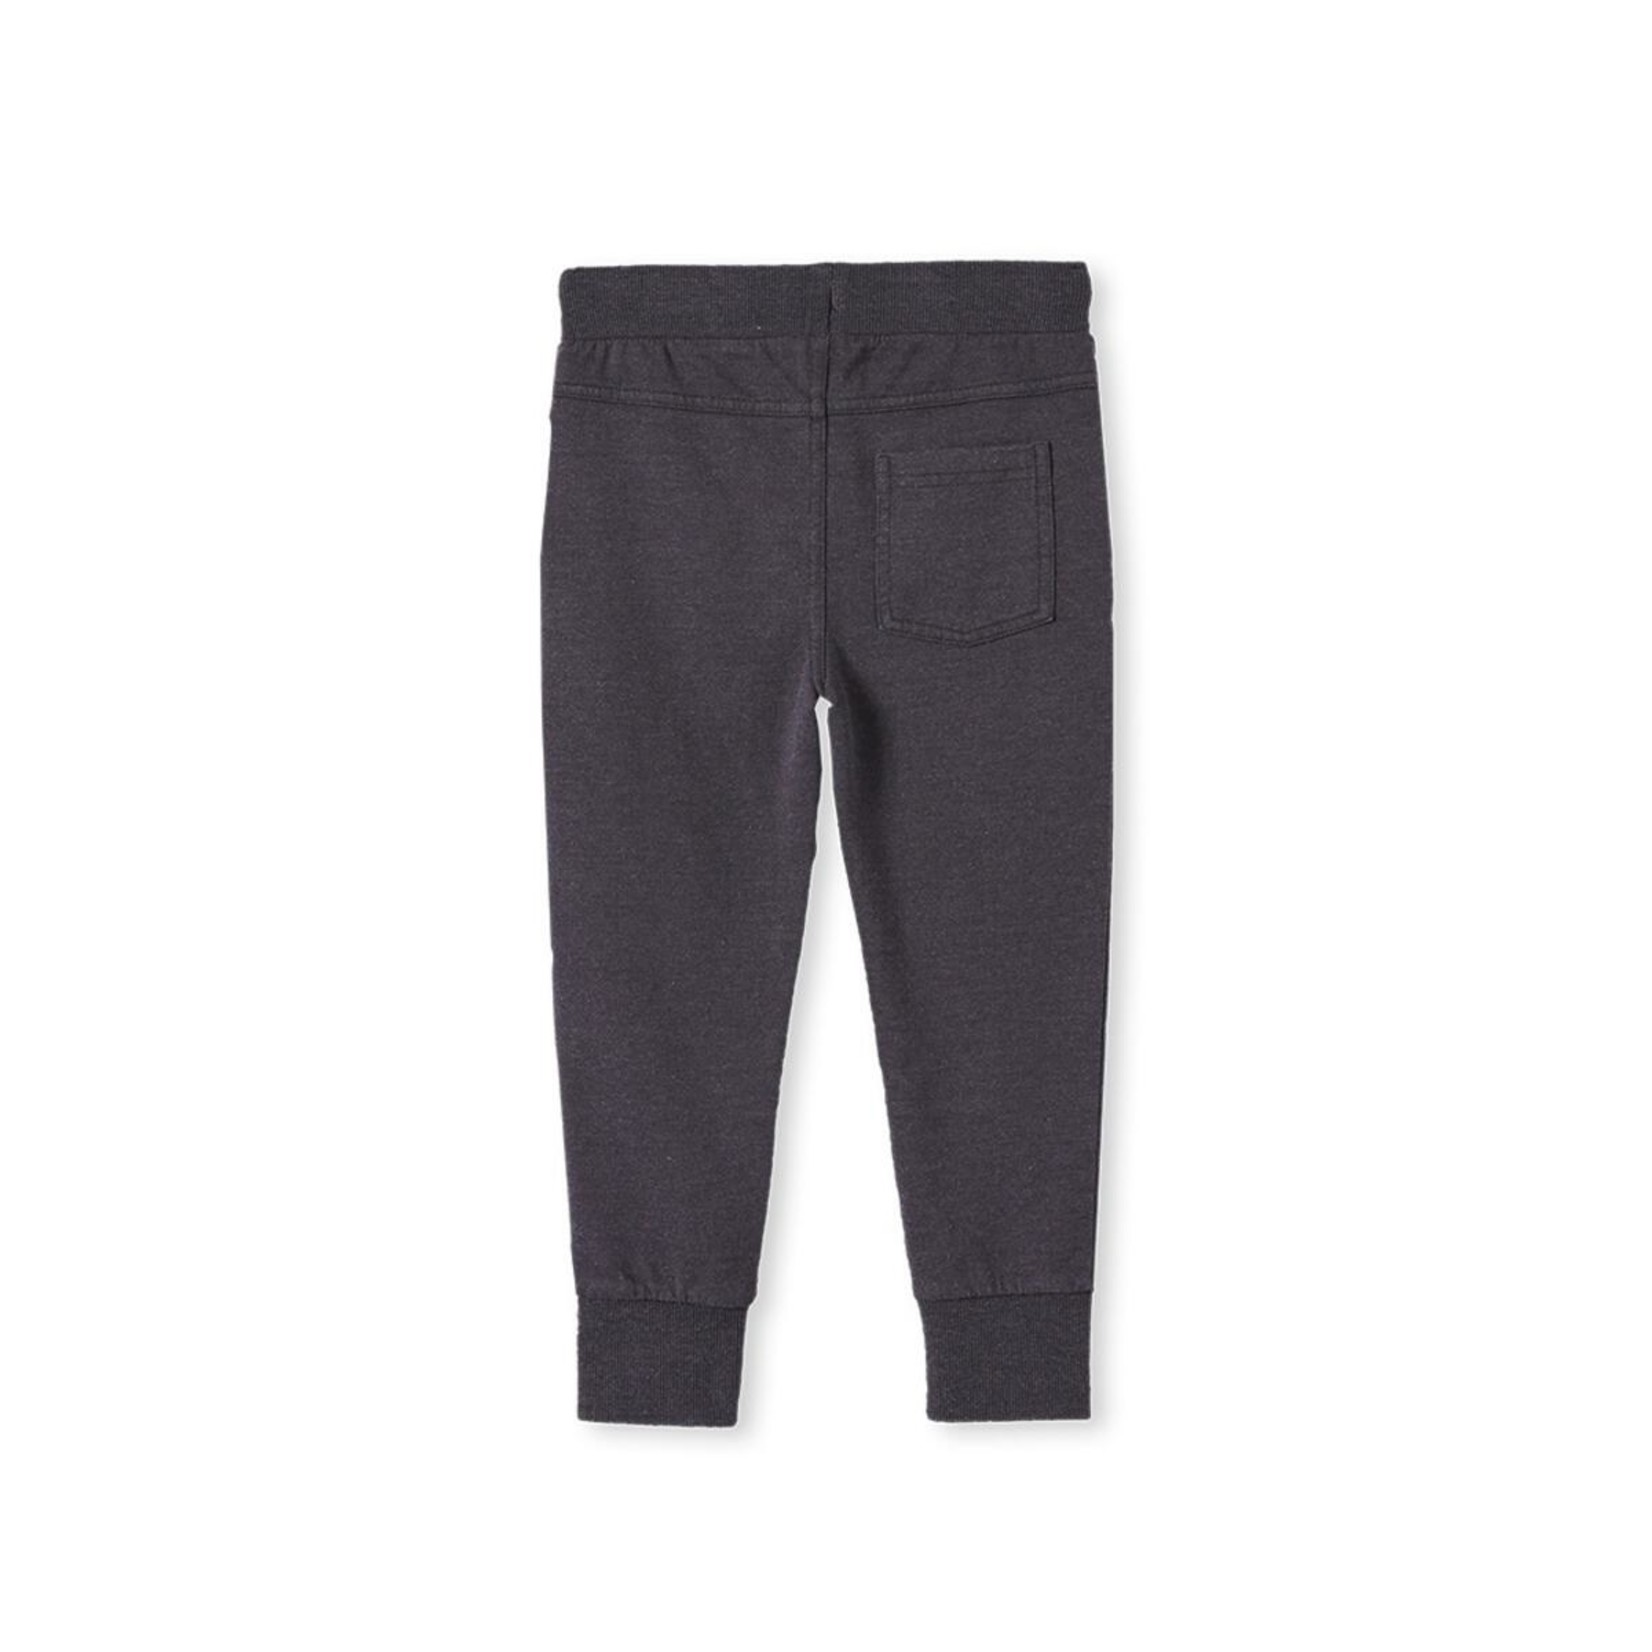 Milky Charcoal Garment Dyed Track Pant